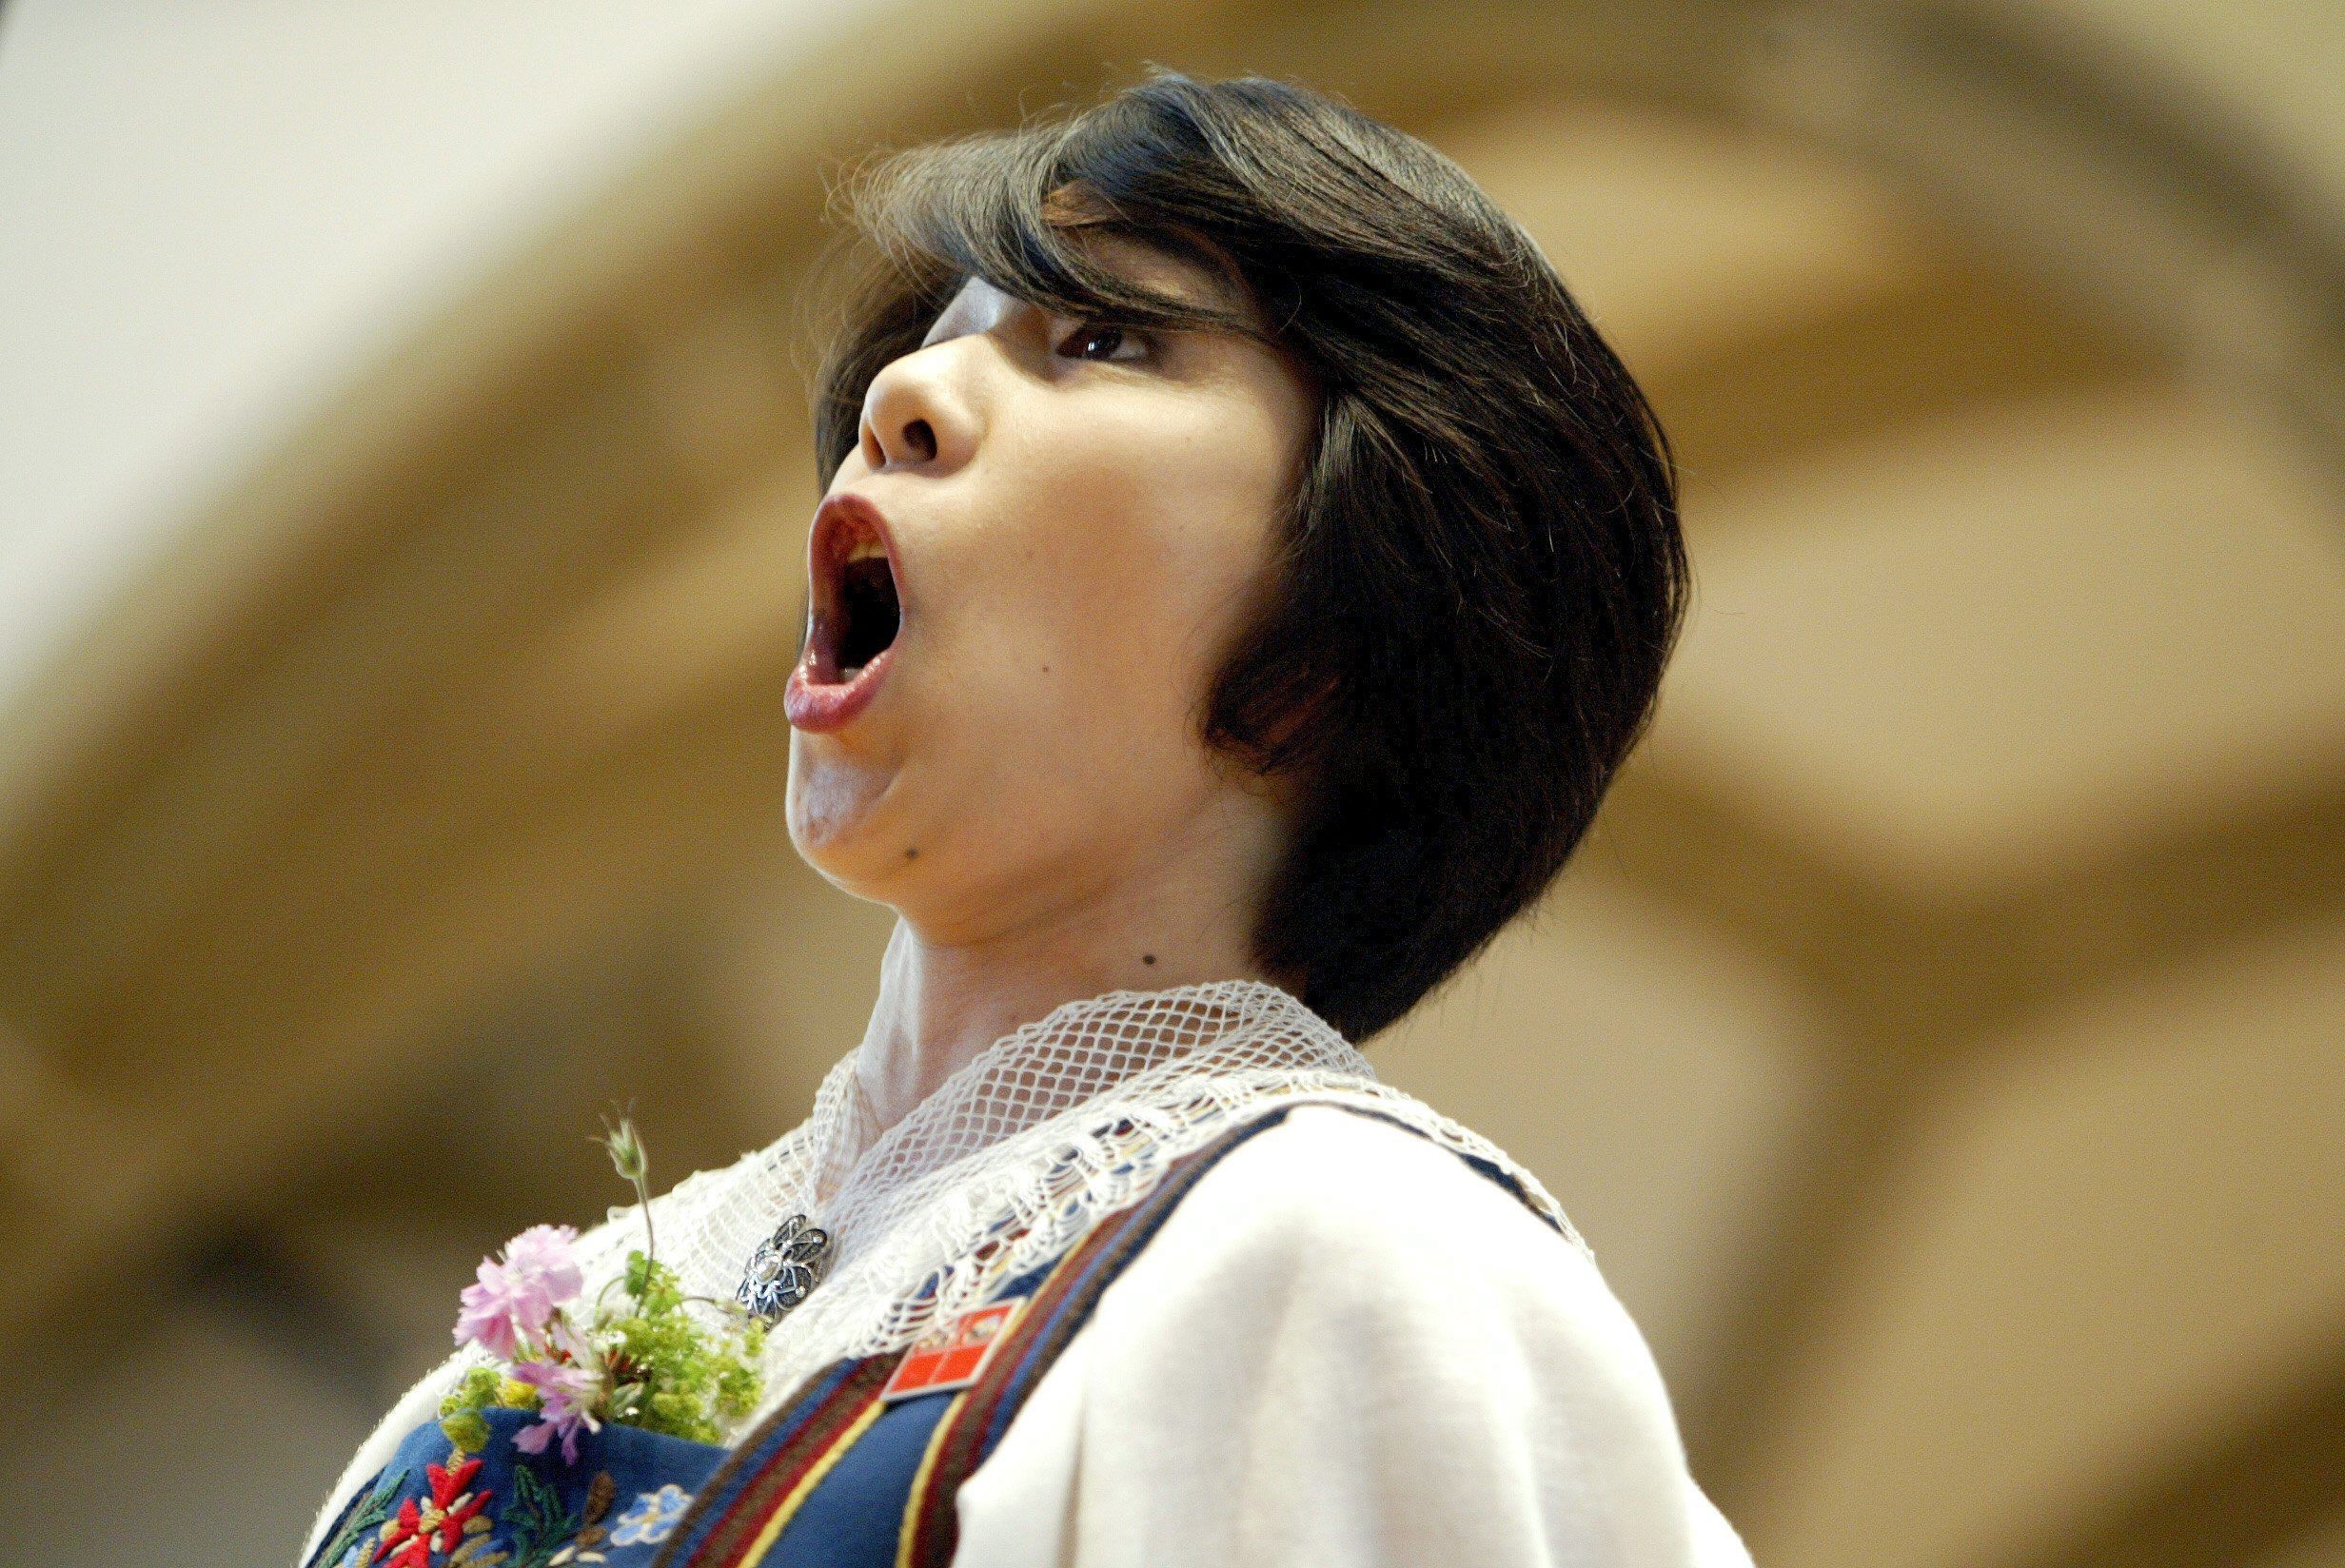 PHOTO: Yodeler Ito Keiko from Tokyo yodels during the 26th National Yodeling Festival in Aarau, Switzerland on June 18, 2005.